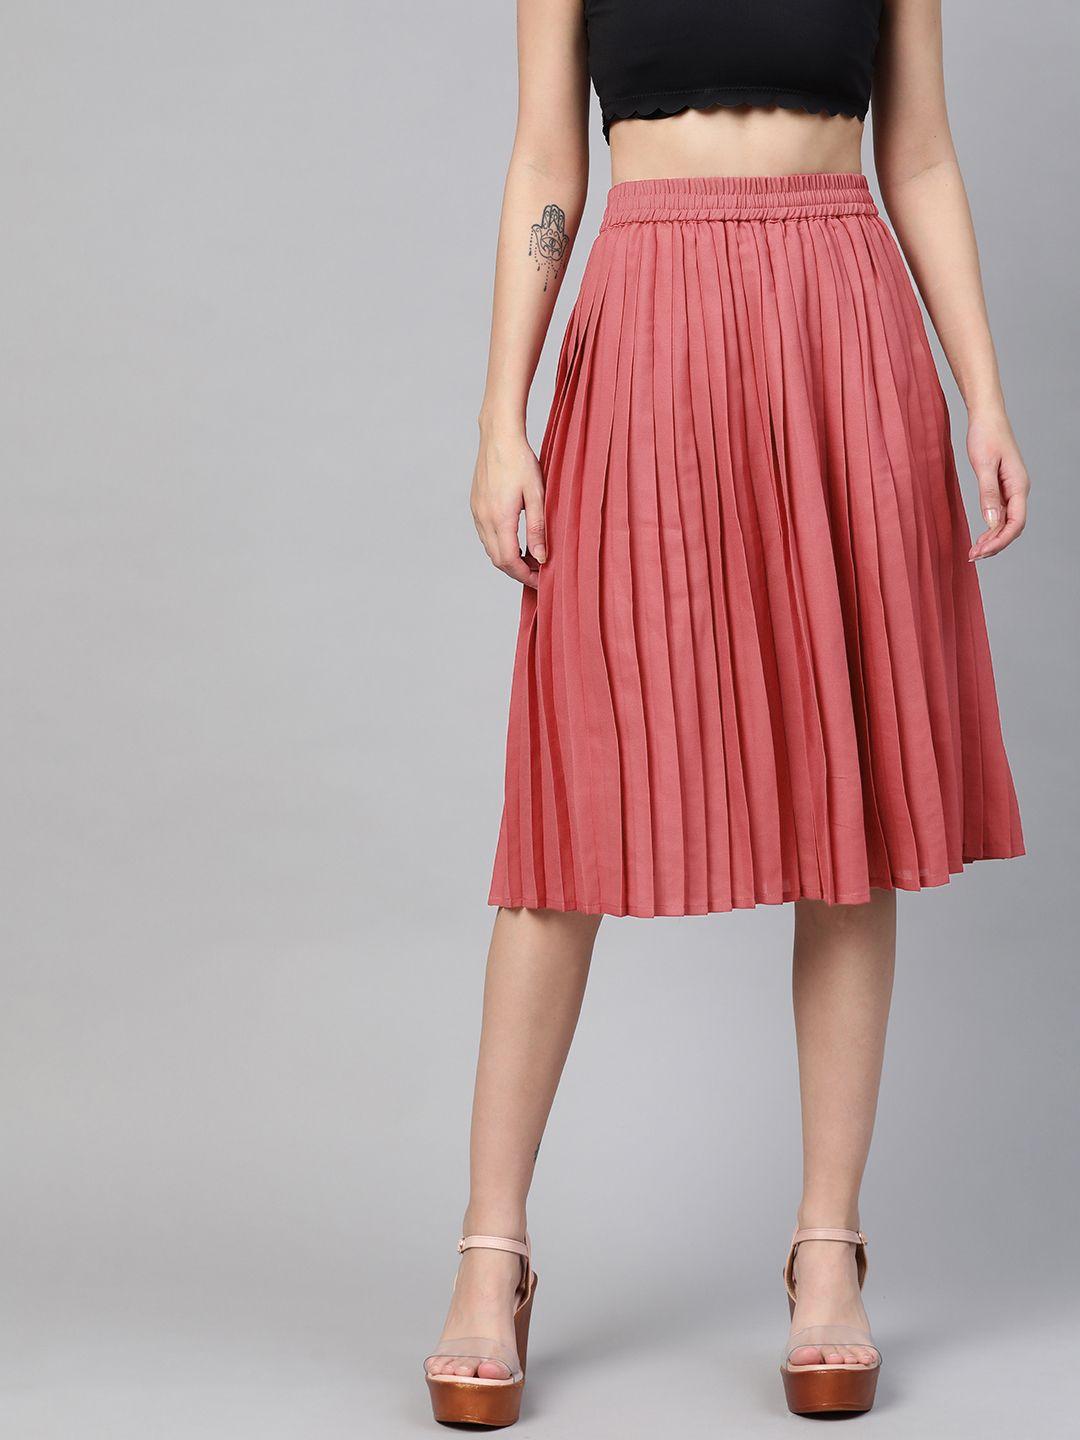 here&now women coral red accordion pleated solid a-line skirt